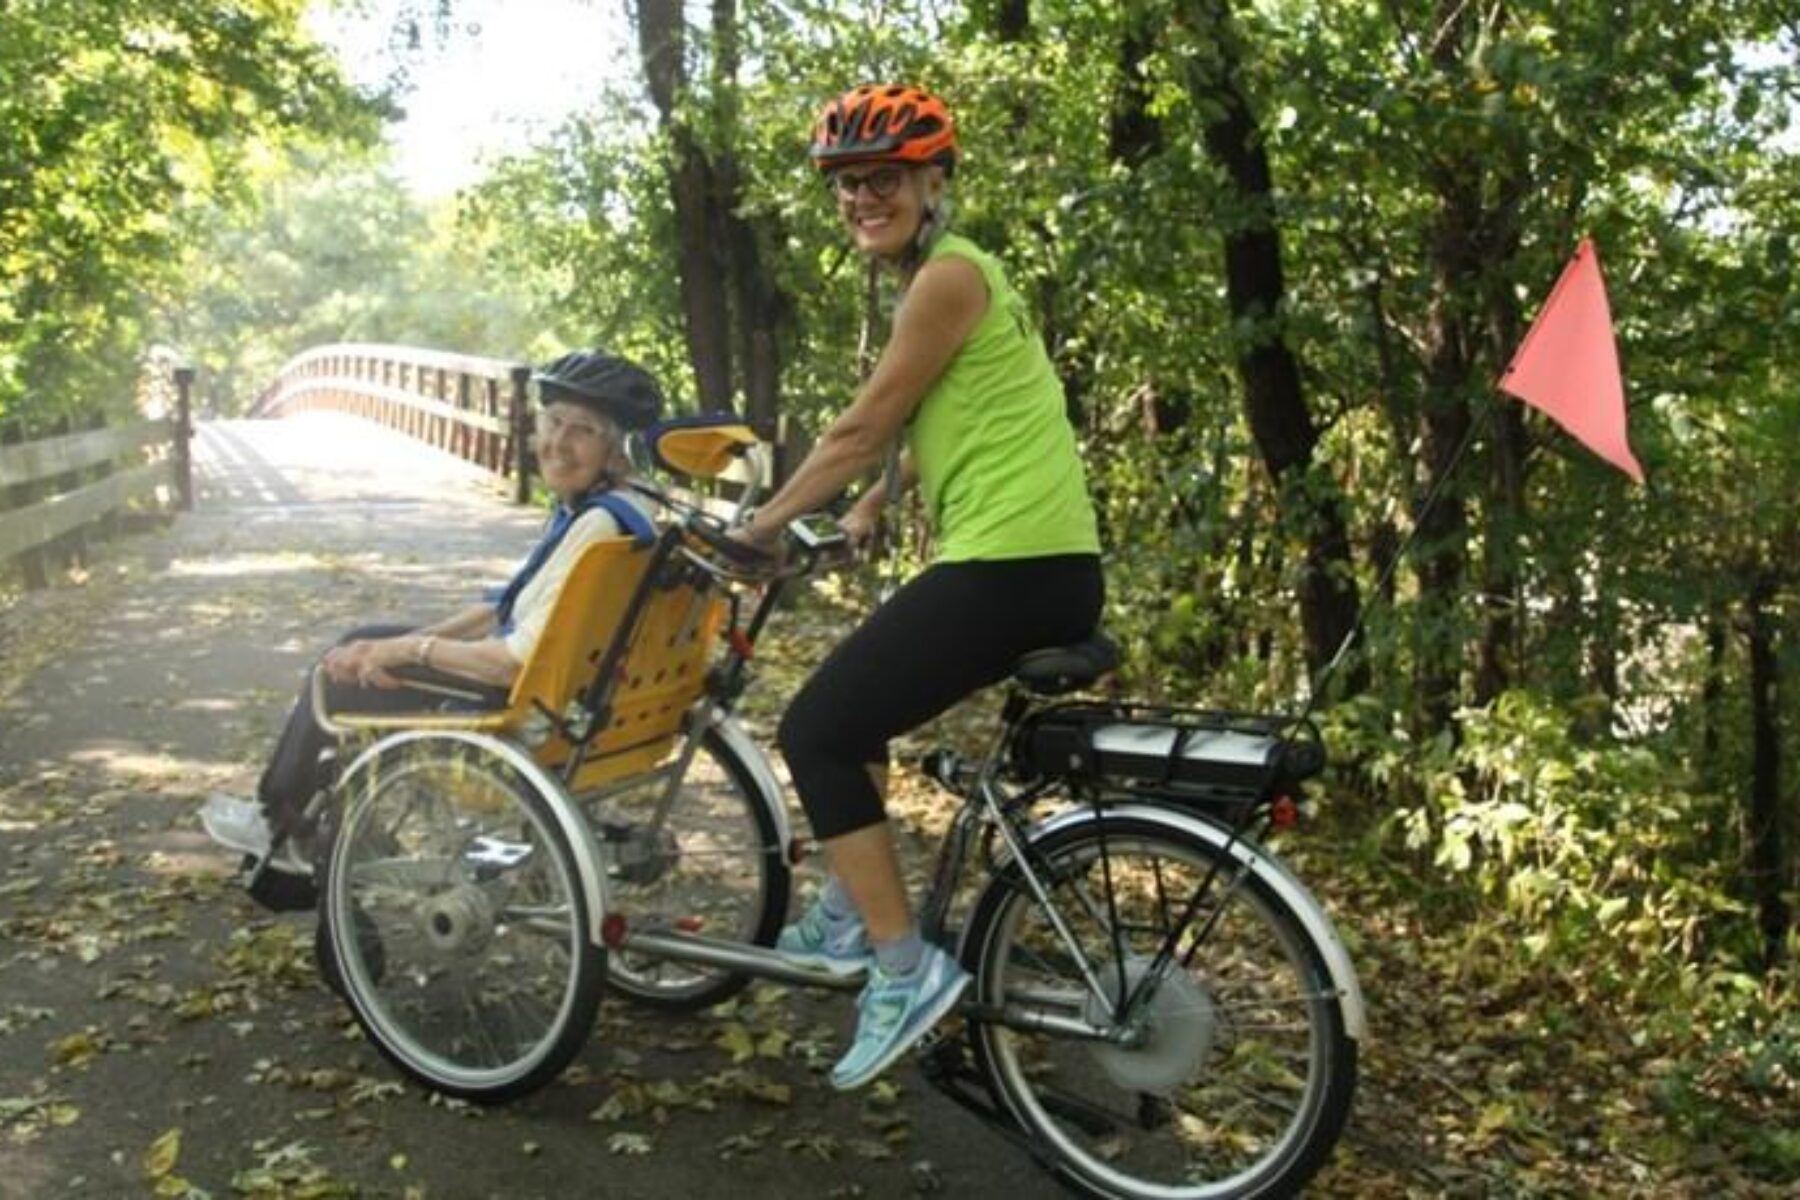 Barbara Brown, founder of Healing Rides, with her mother on the Constitution Trail in Illinois | Photo courtesy Barbara Brown